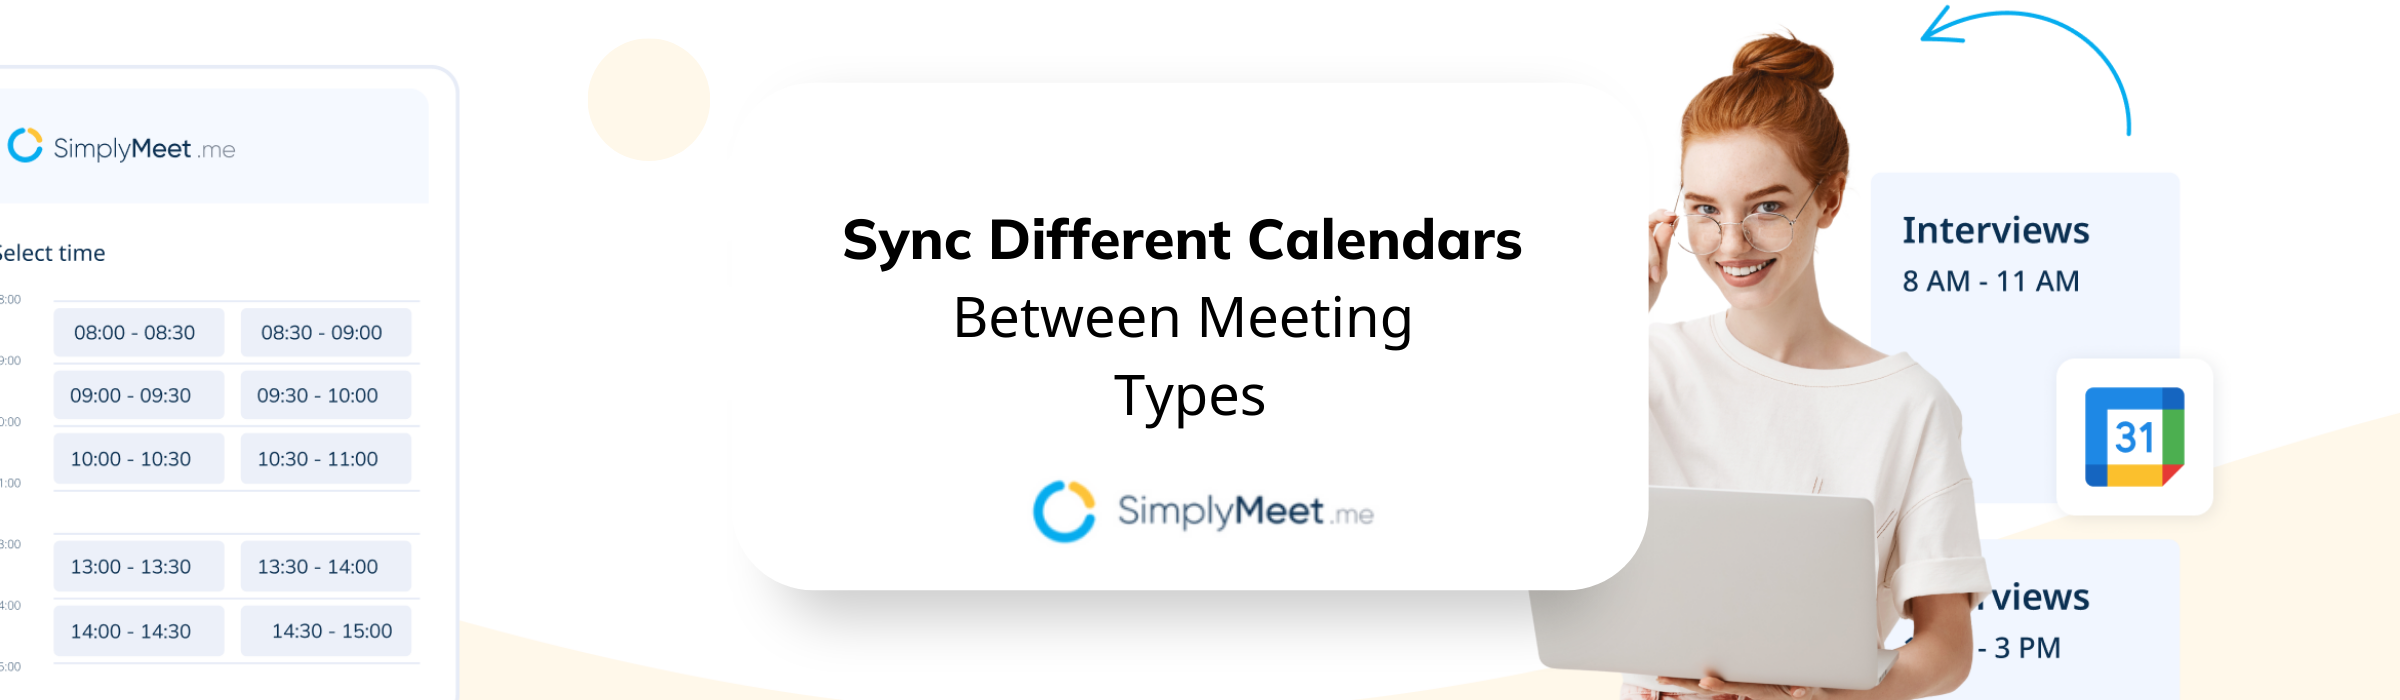 Sync Different Calendars Between Meeting Types